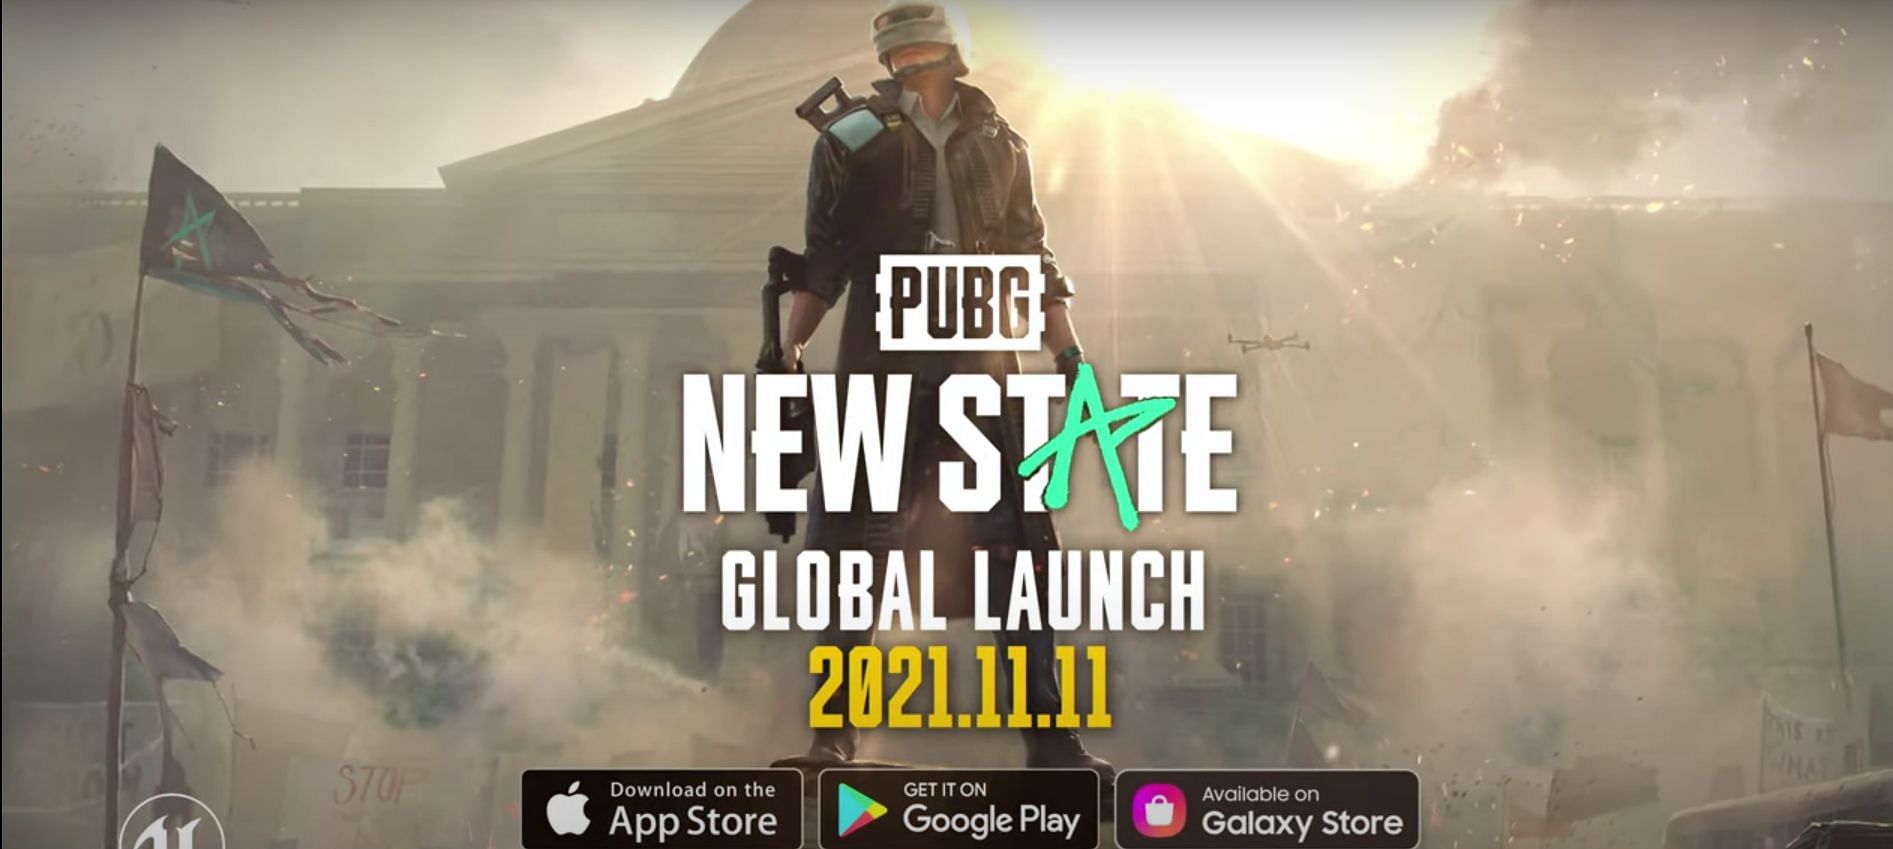 PUBG New State will launch globally on 11 November (Image via PUBG New State, YouTube)